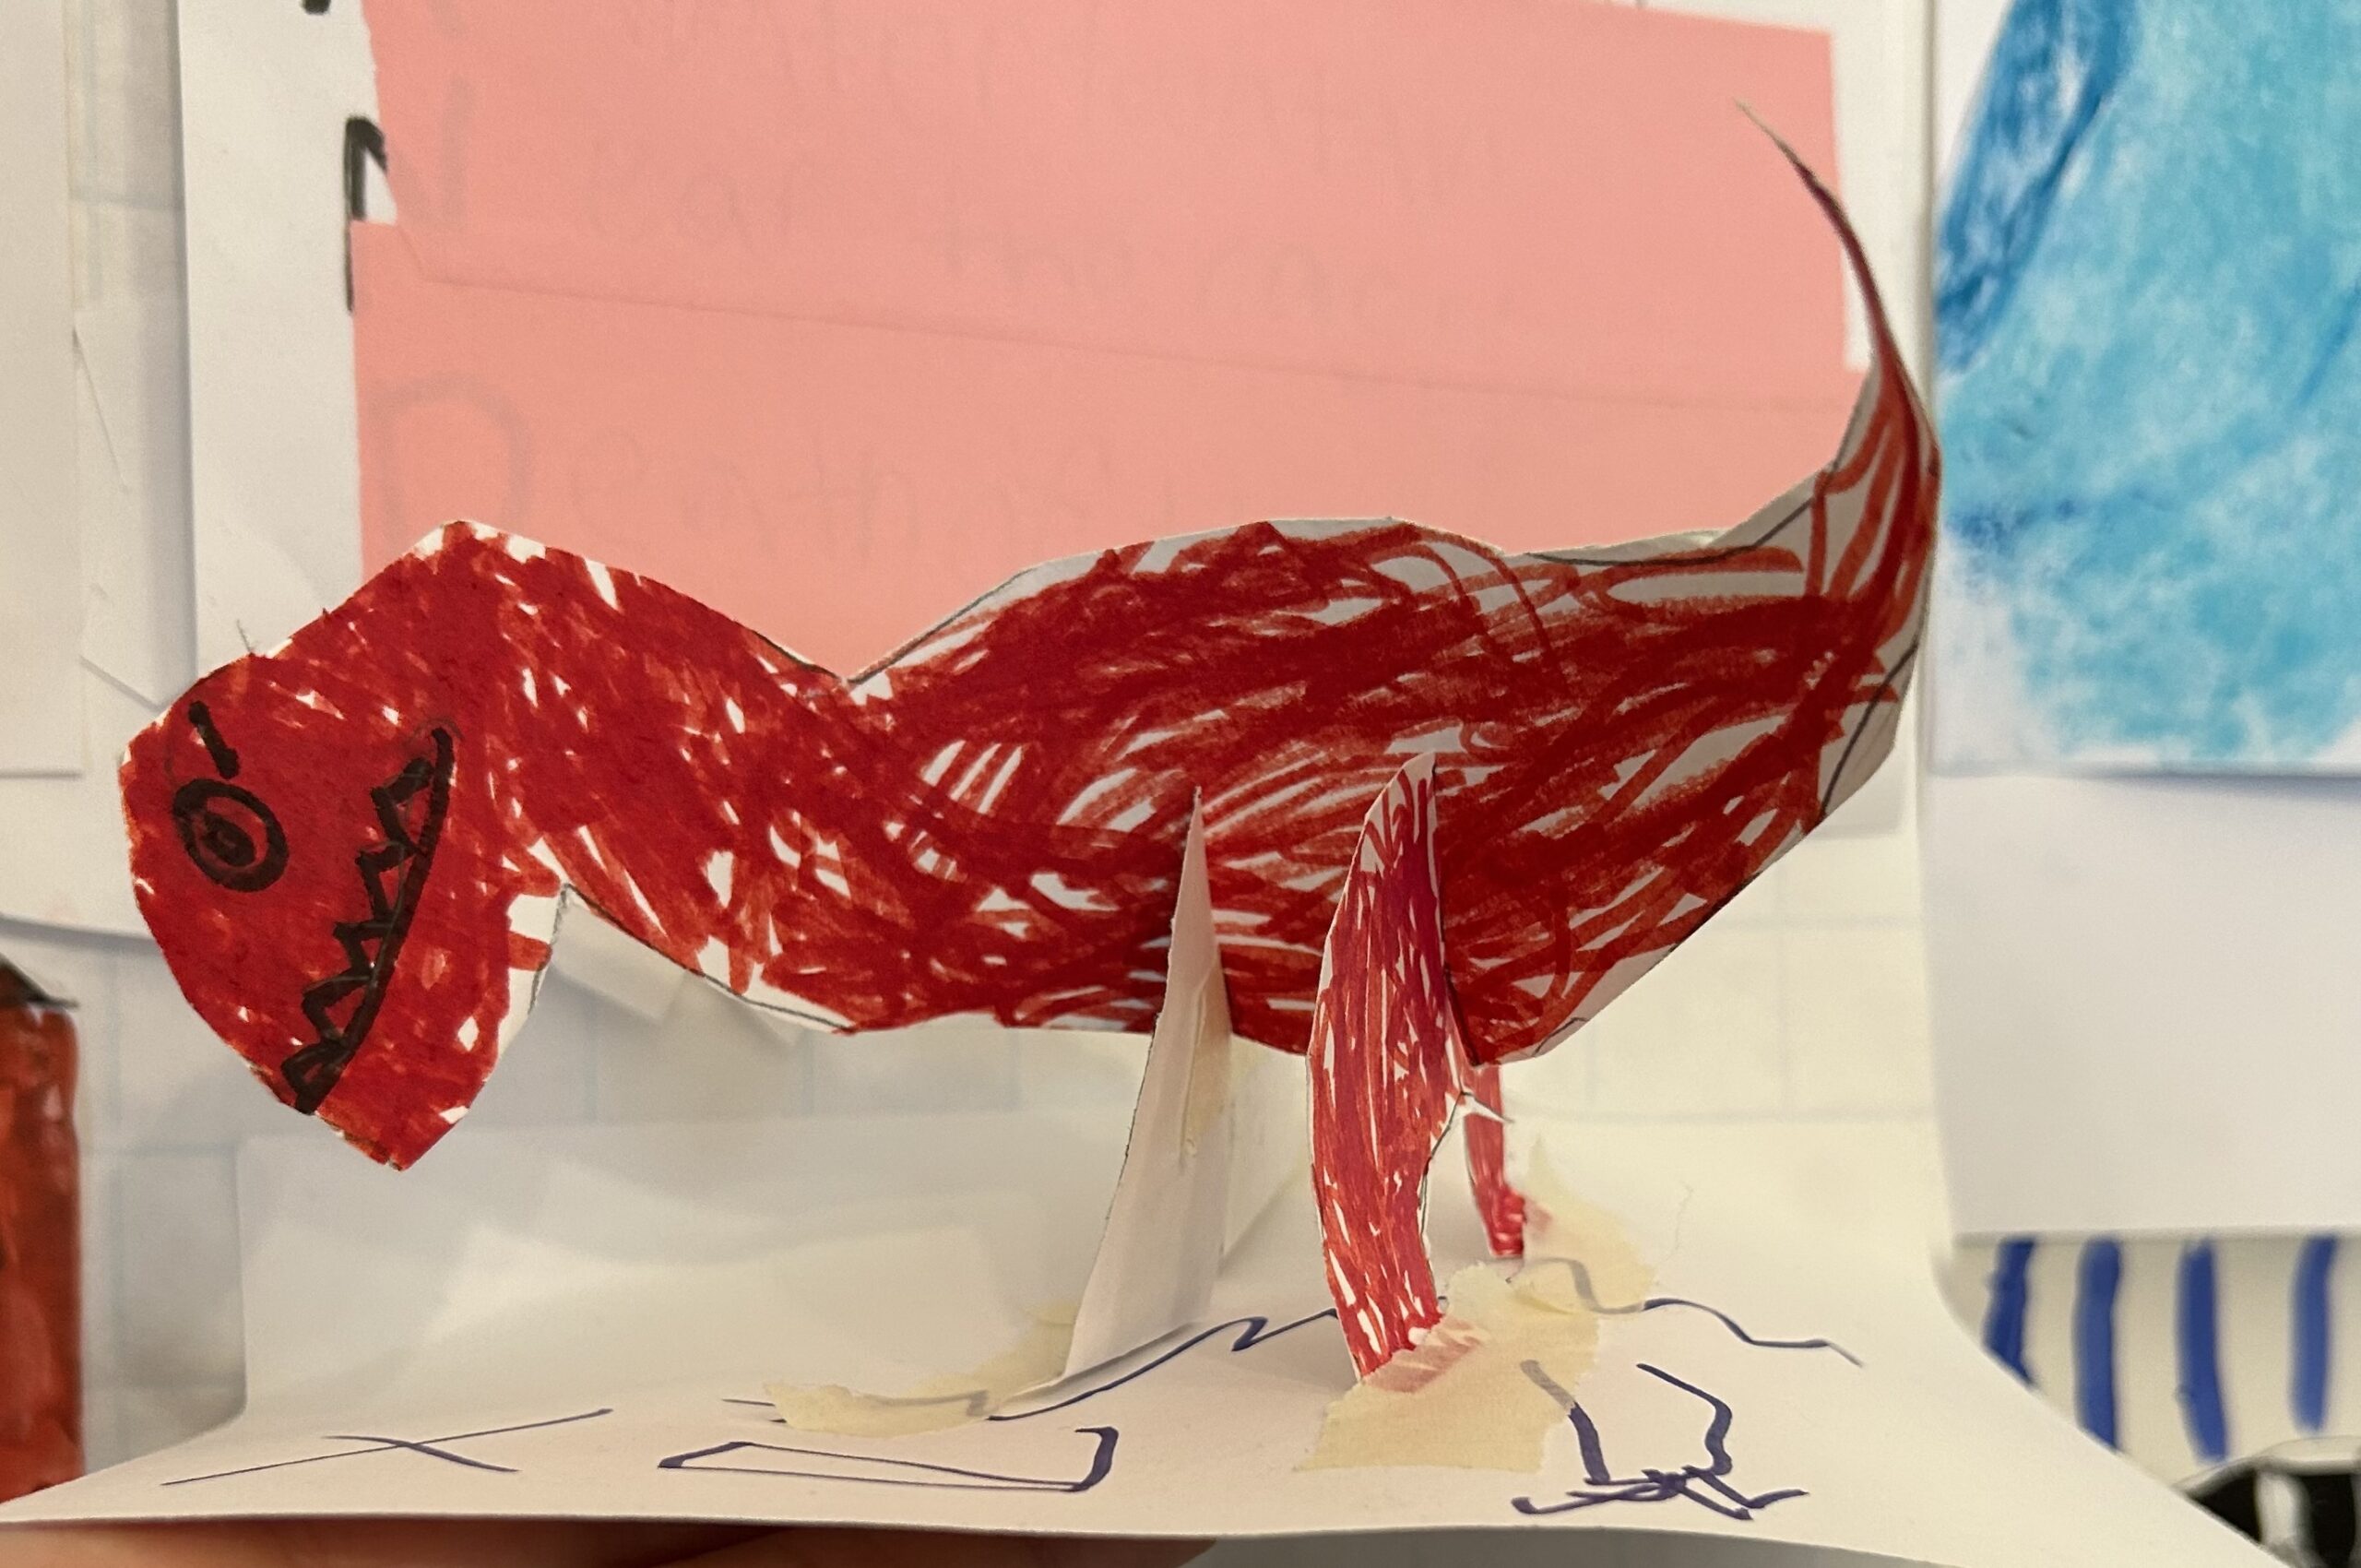 a crayon drawn and cut out from paper red tyrannosaurus rex with paper legs taped onto a flat service to appear standing, made by a child